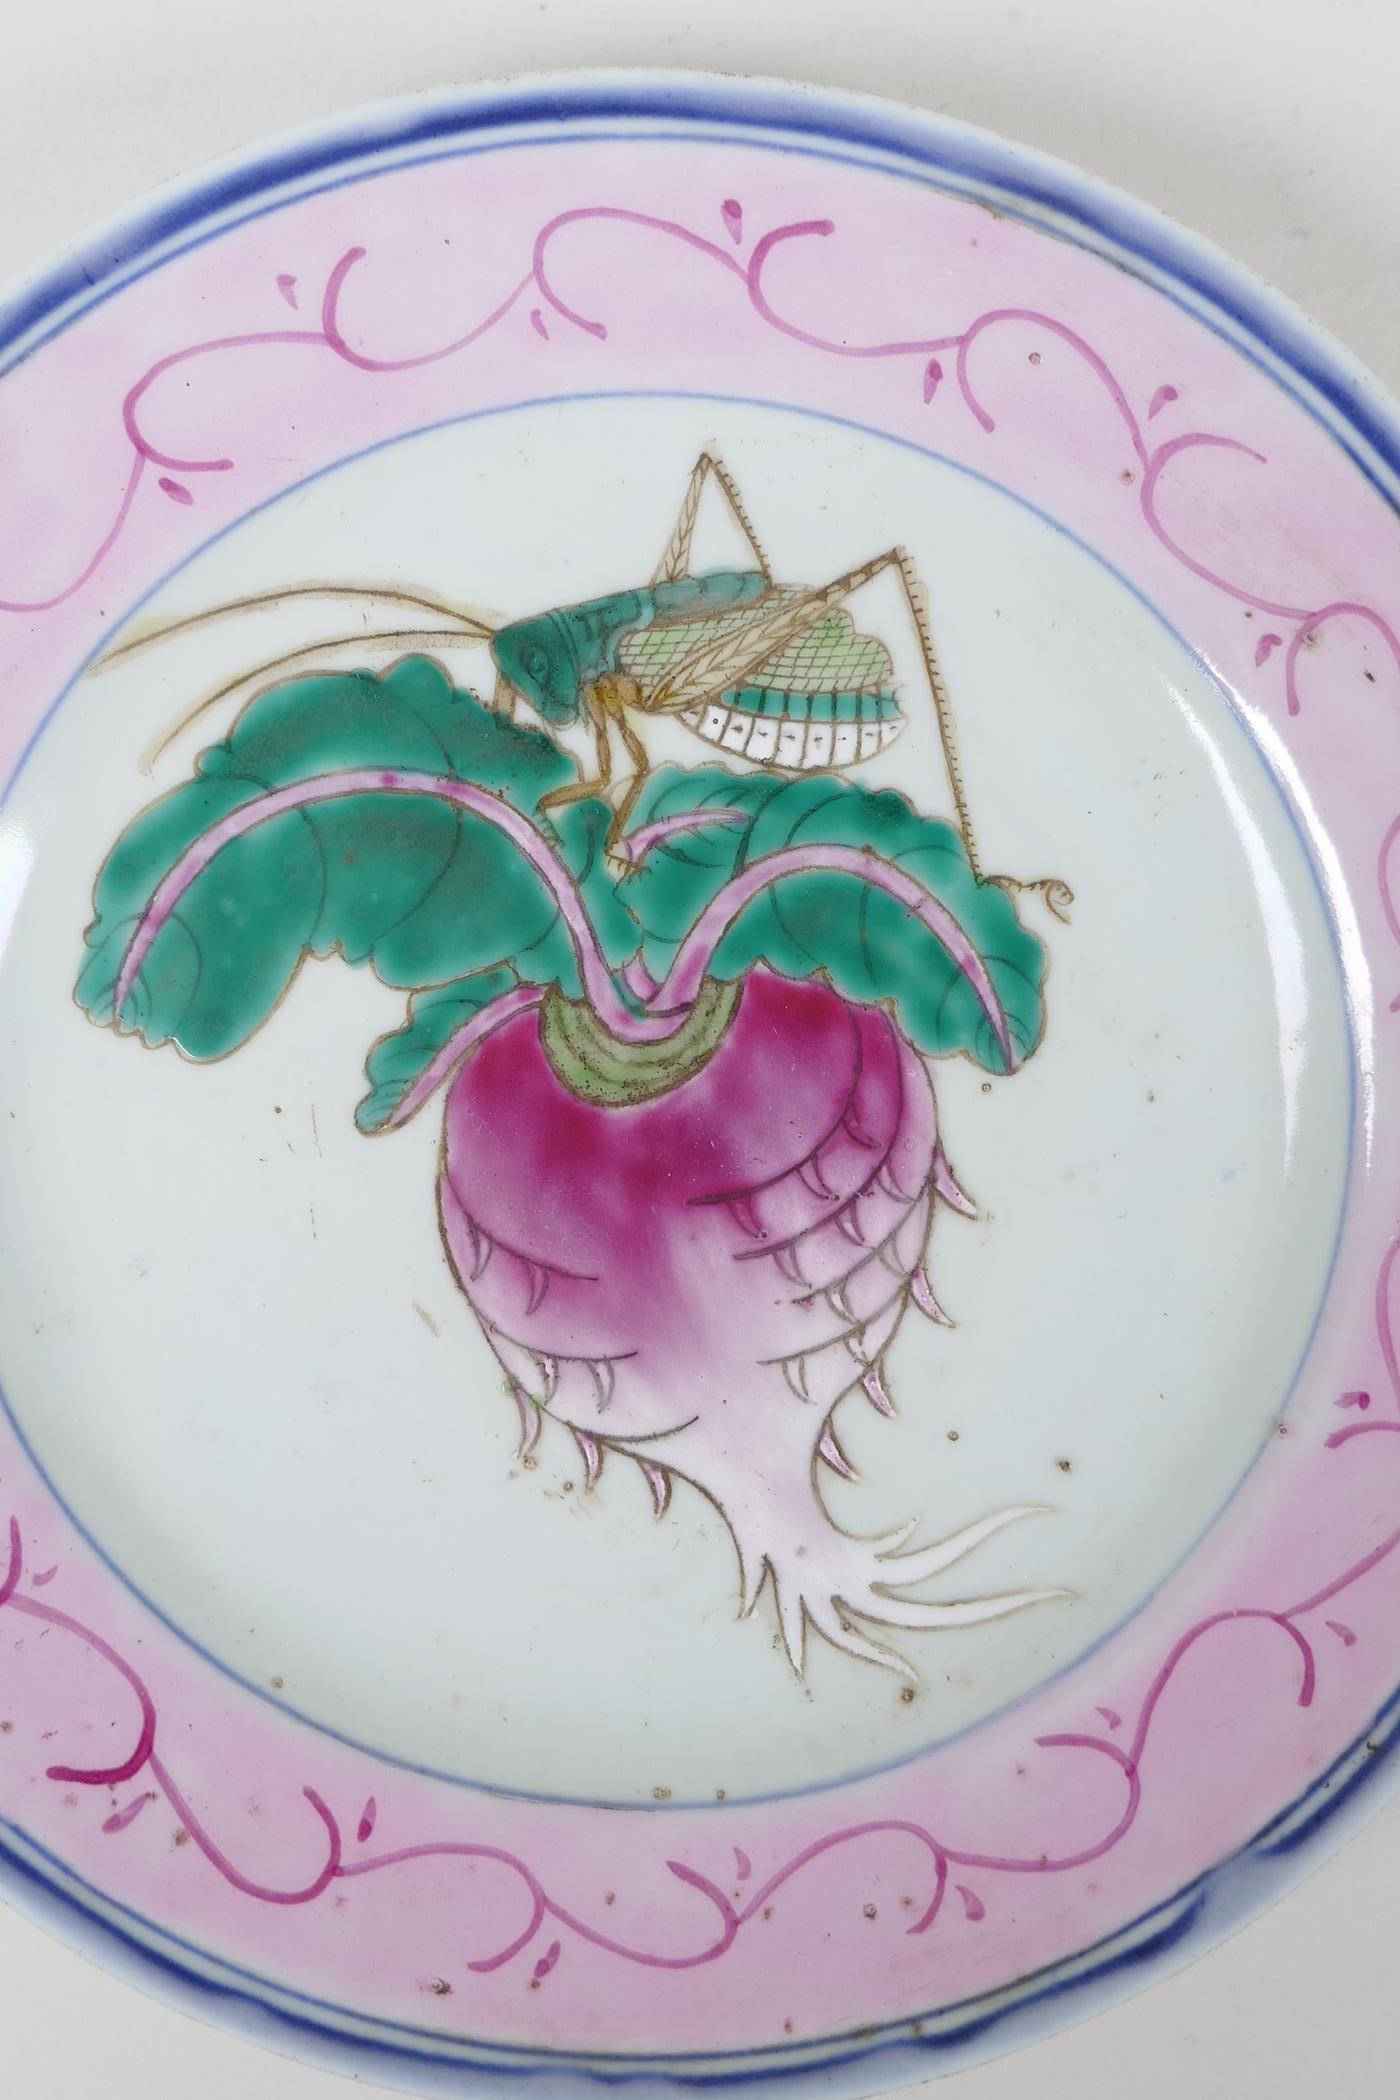 A late C19th/early C20th famille rose porcelain cabinet plate decorated with a radish and cricket, - Image 2 of 4